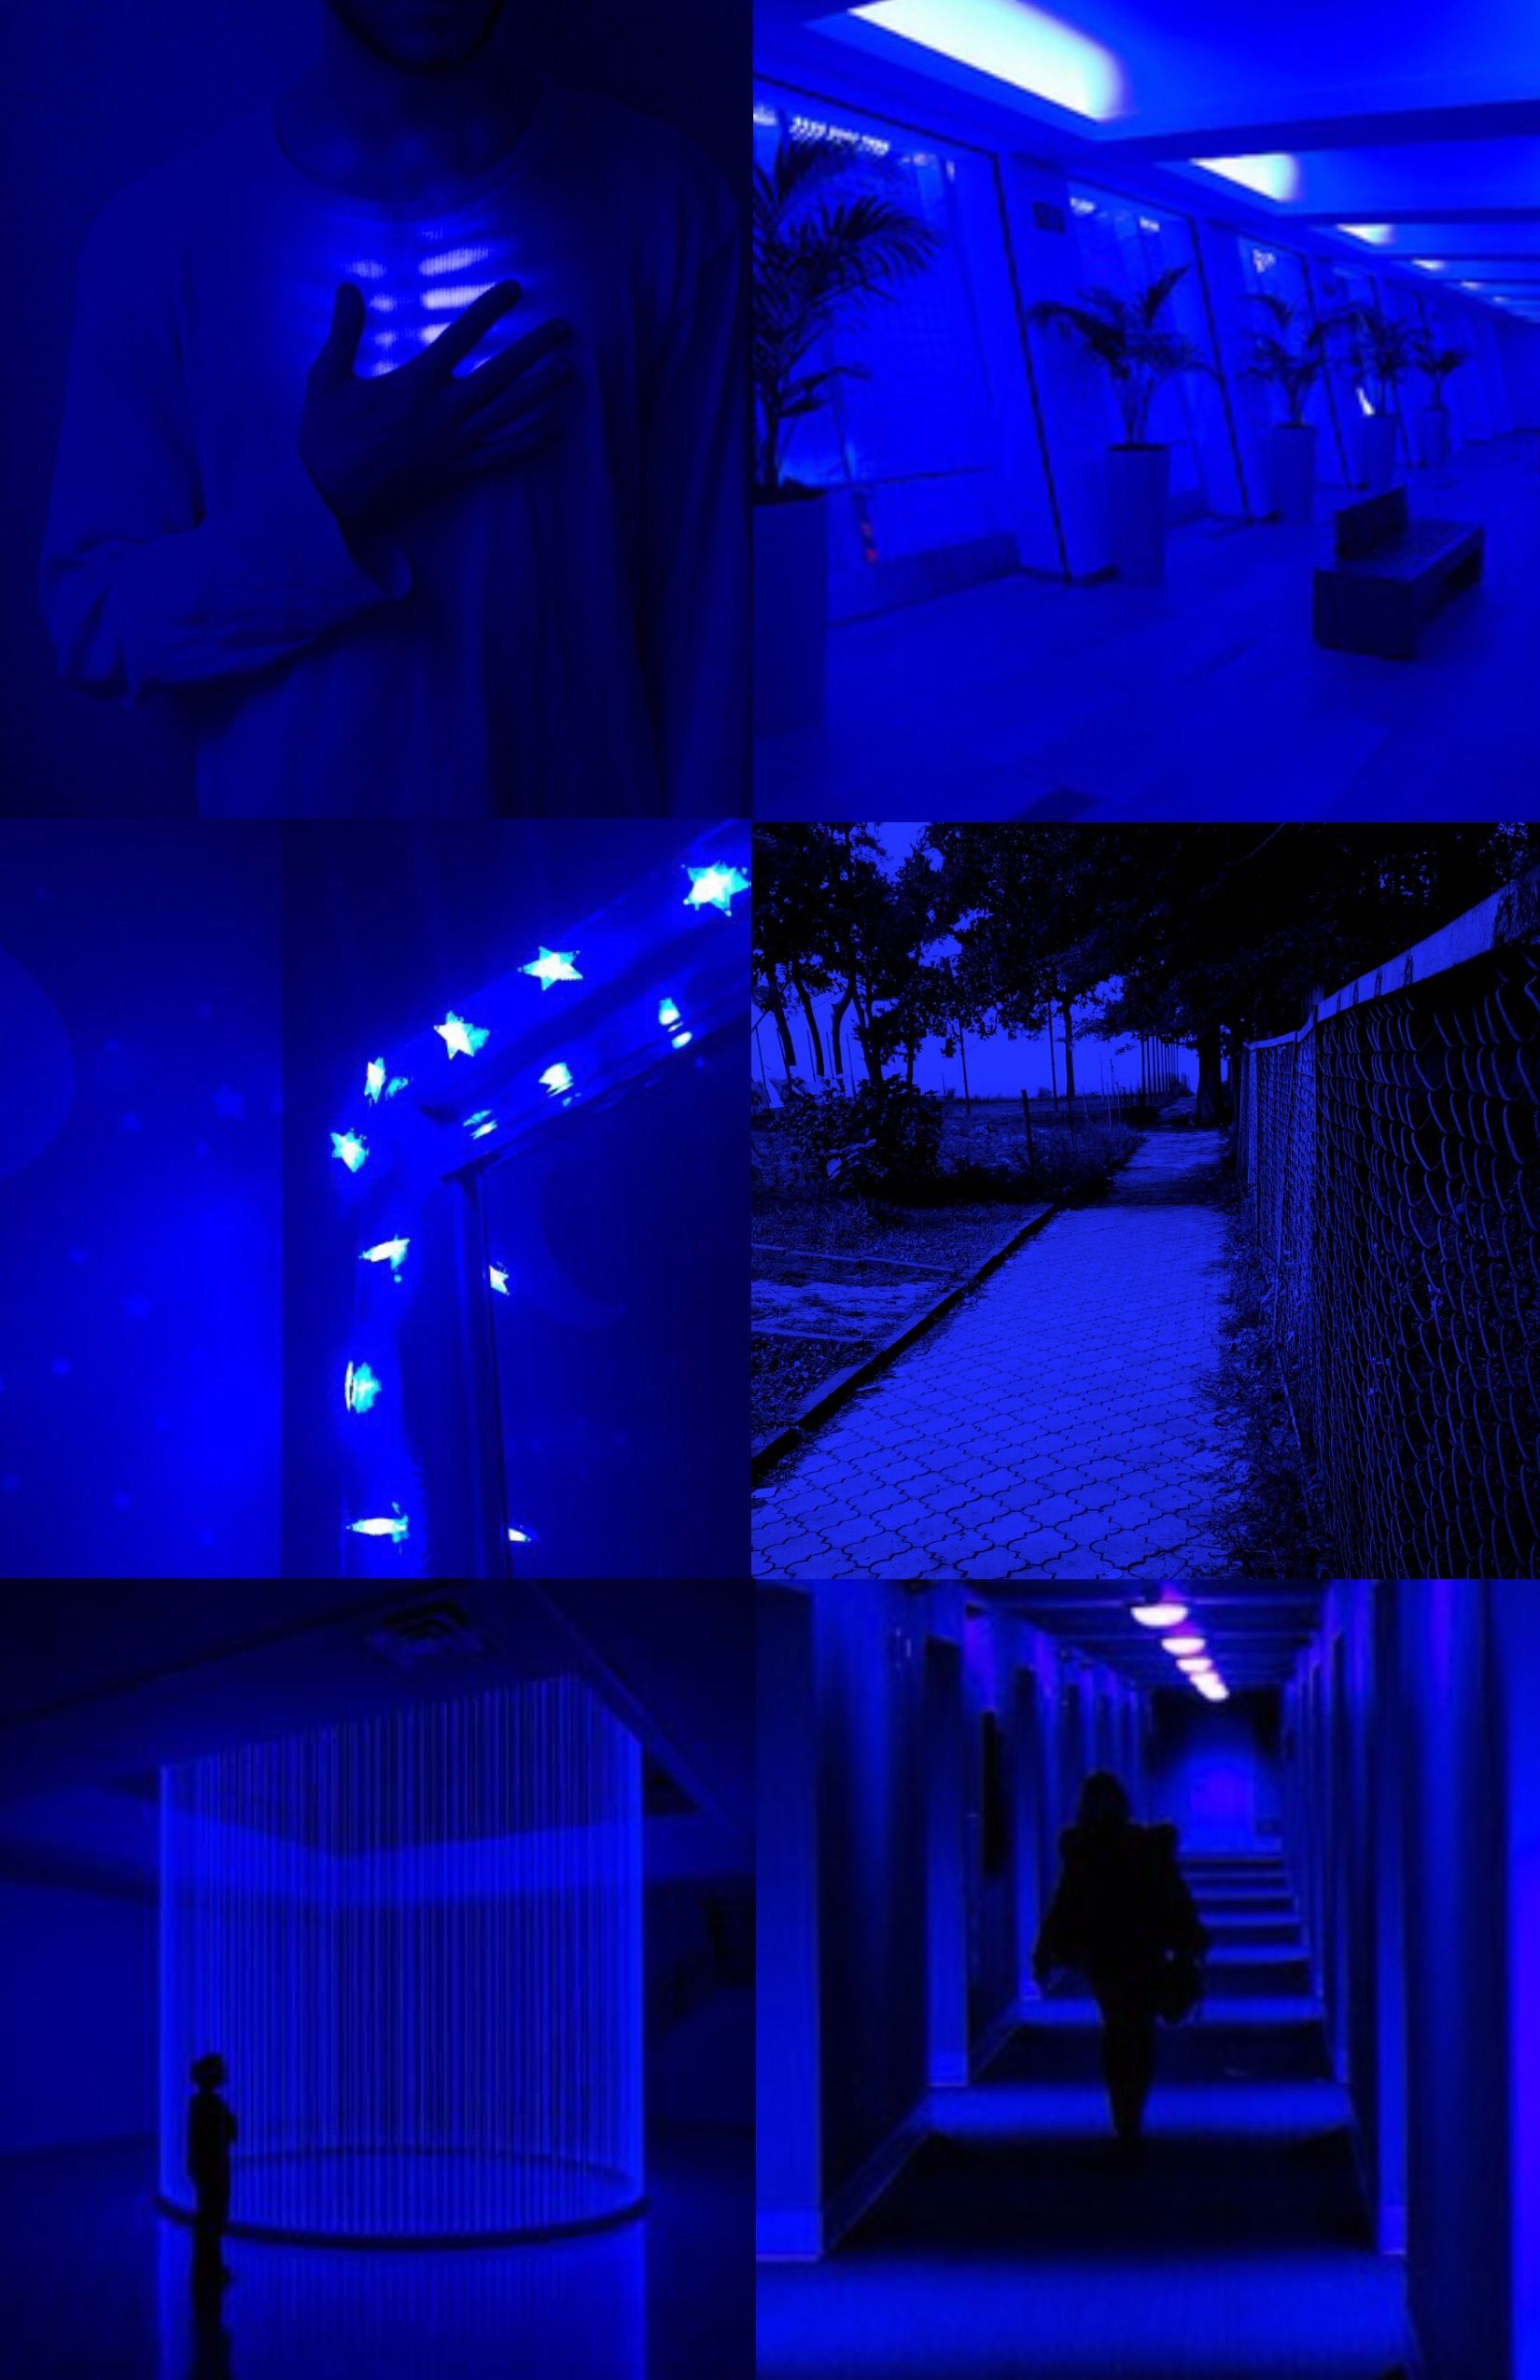 A collage of pictures with blue lighting - Dark blue